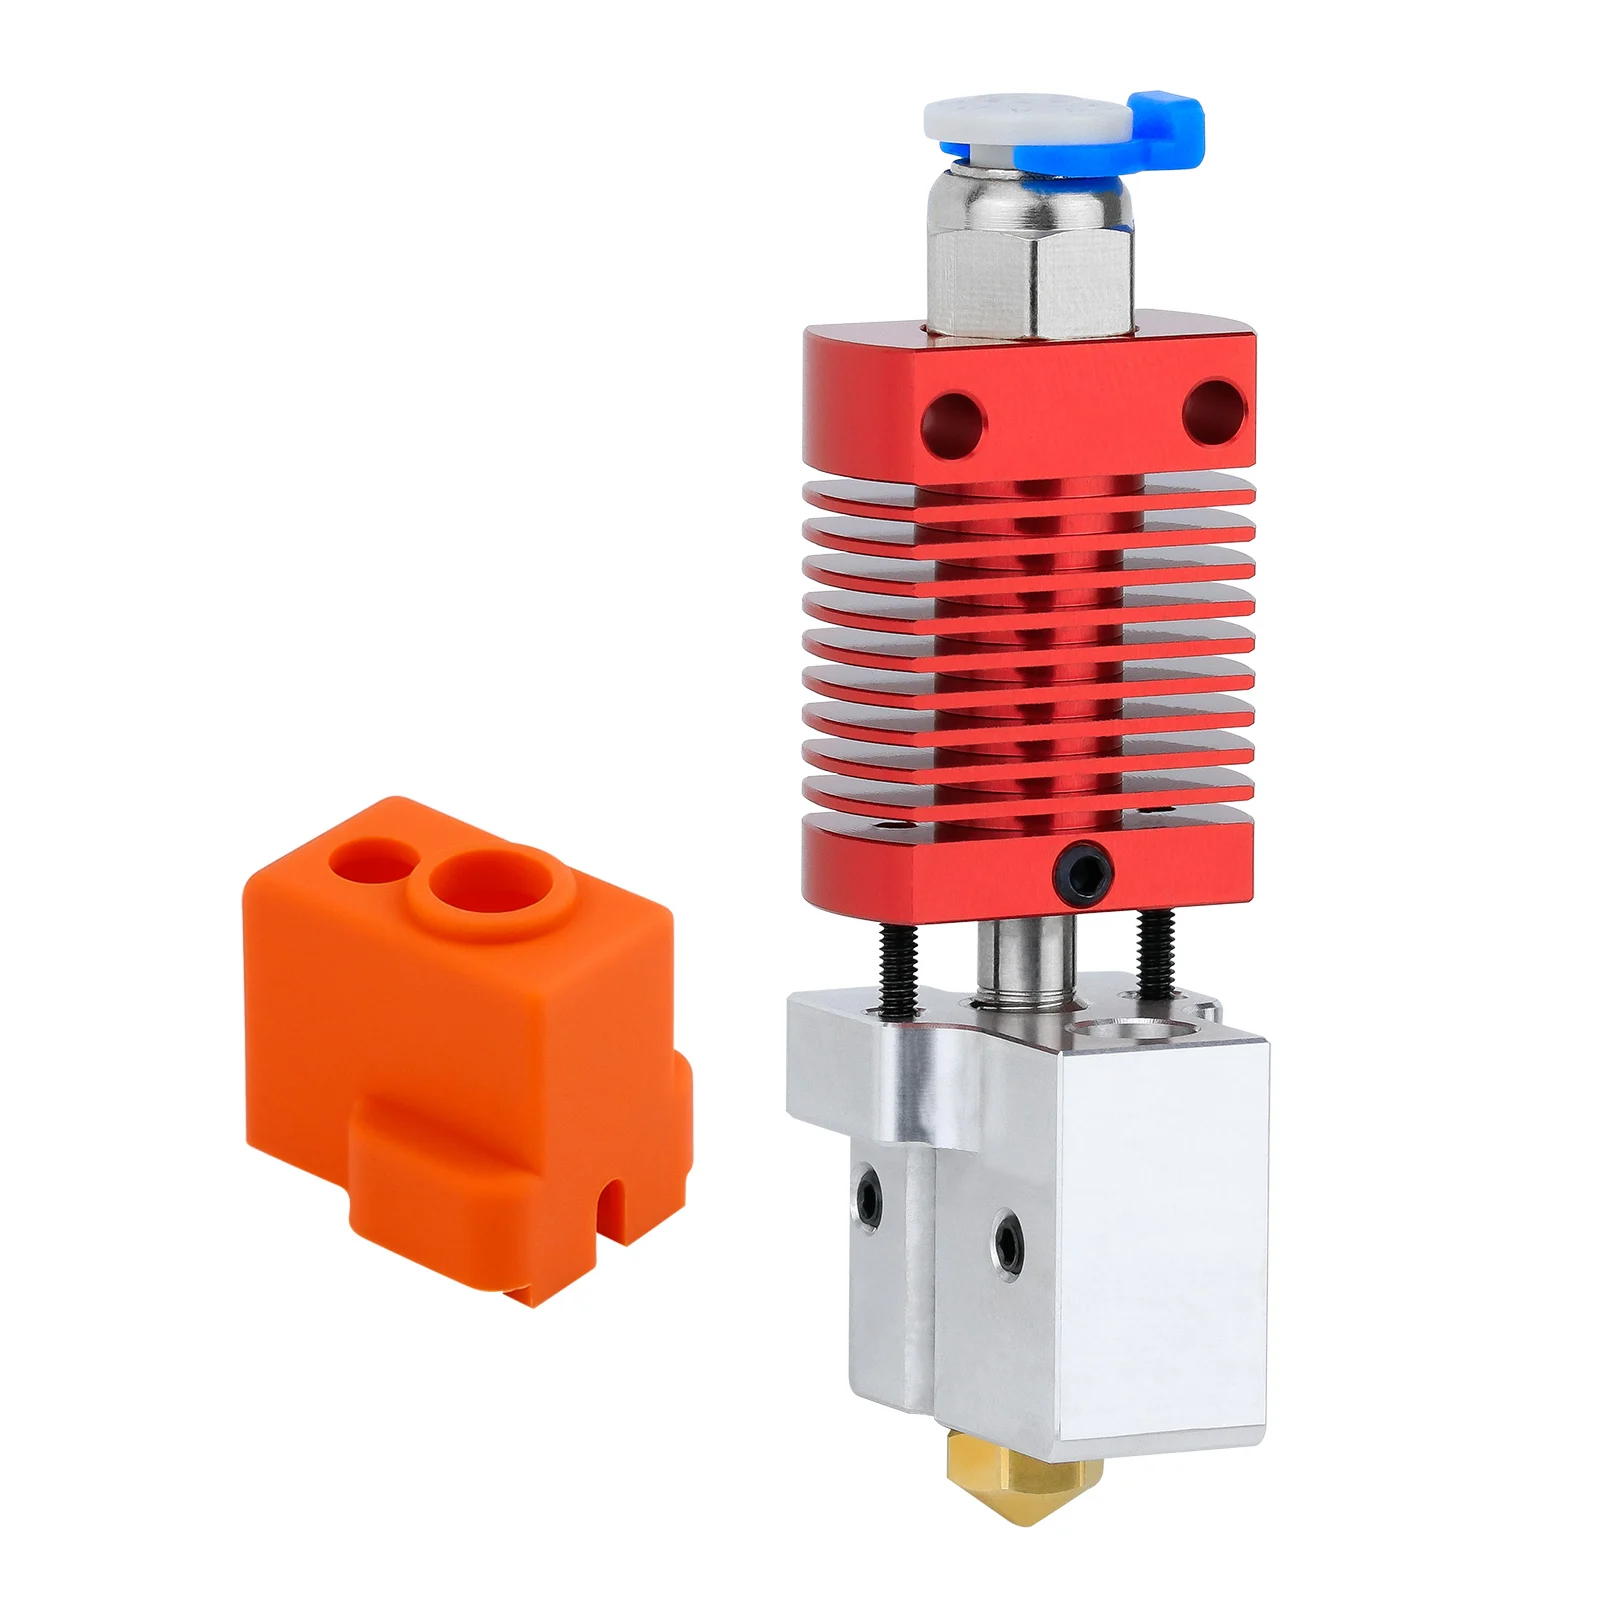 Newest Ender3 High Temperature Hotend Kit Reach To 550℃ Copper Plated Volcano Nozzle Heating Block Bi-Metal Throat CR10 Extruder creativity 3d printer corexy elf pro newest 2040 profile all metal ultra stable frame high precision support 3d bltouch leveling